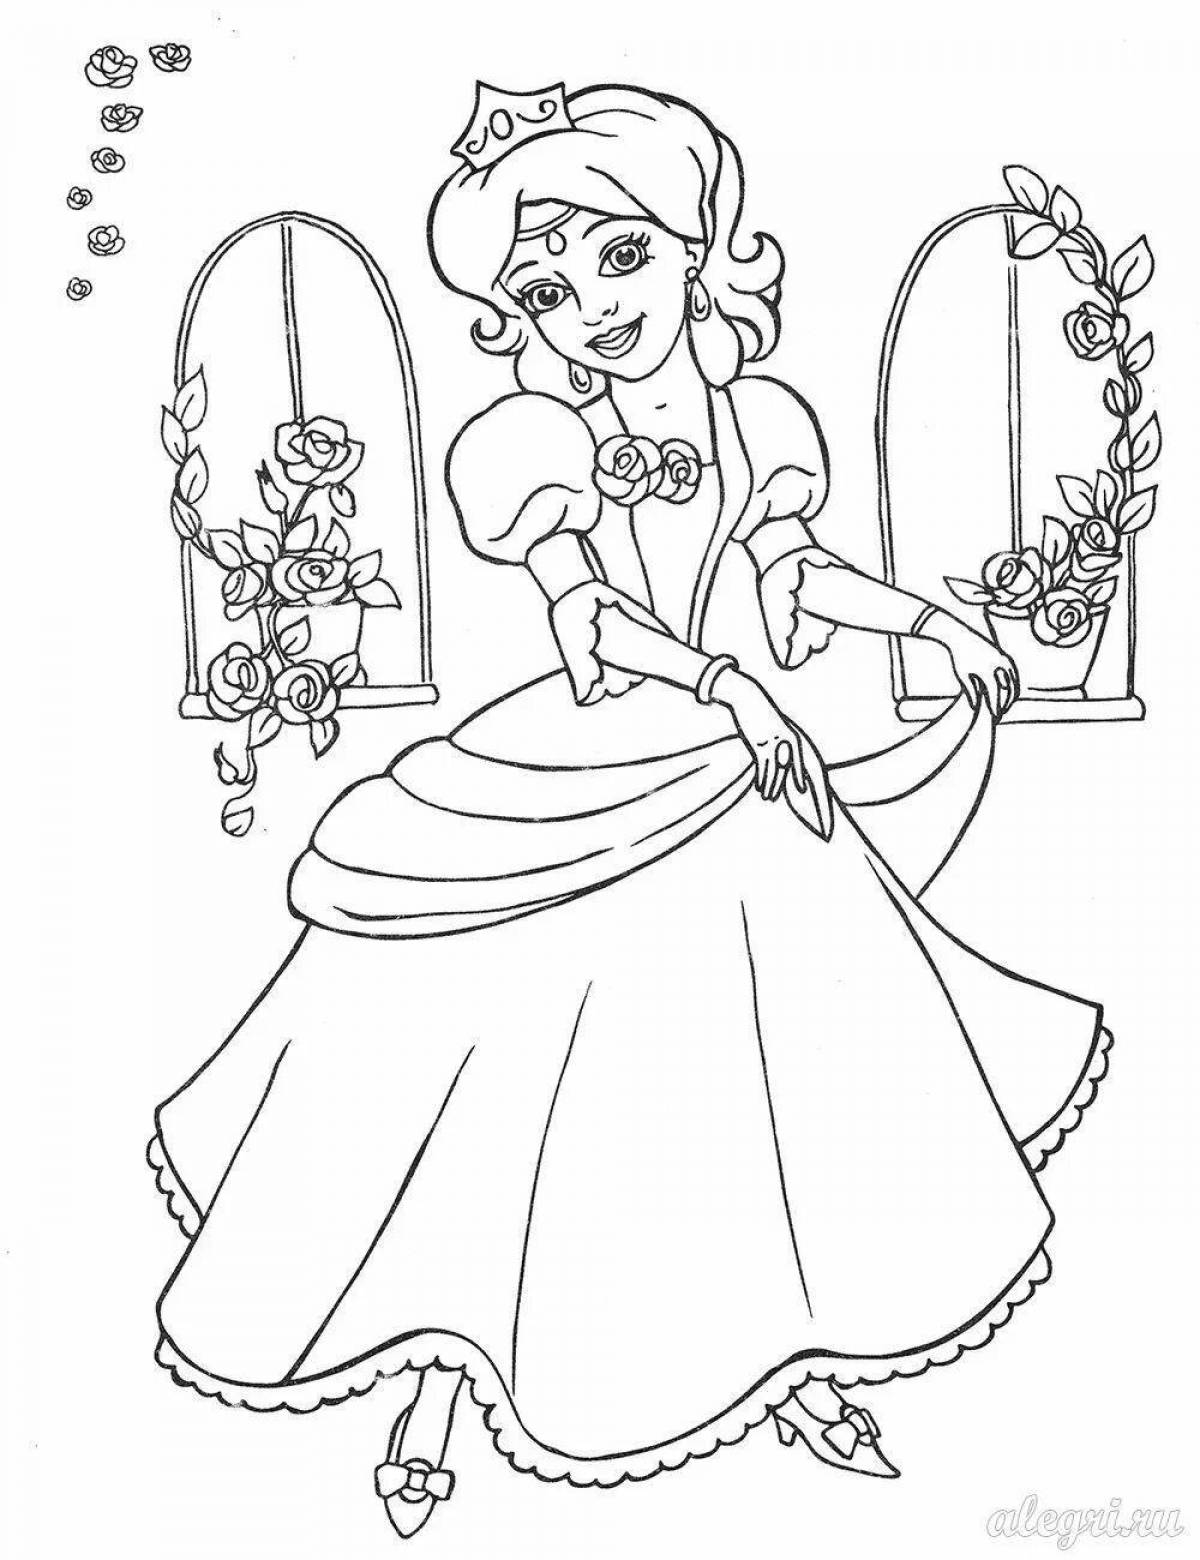 Gorgeous princess coloring pages for girls 7 years old